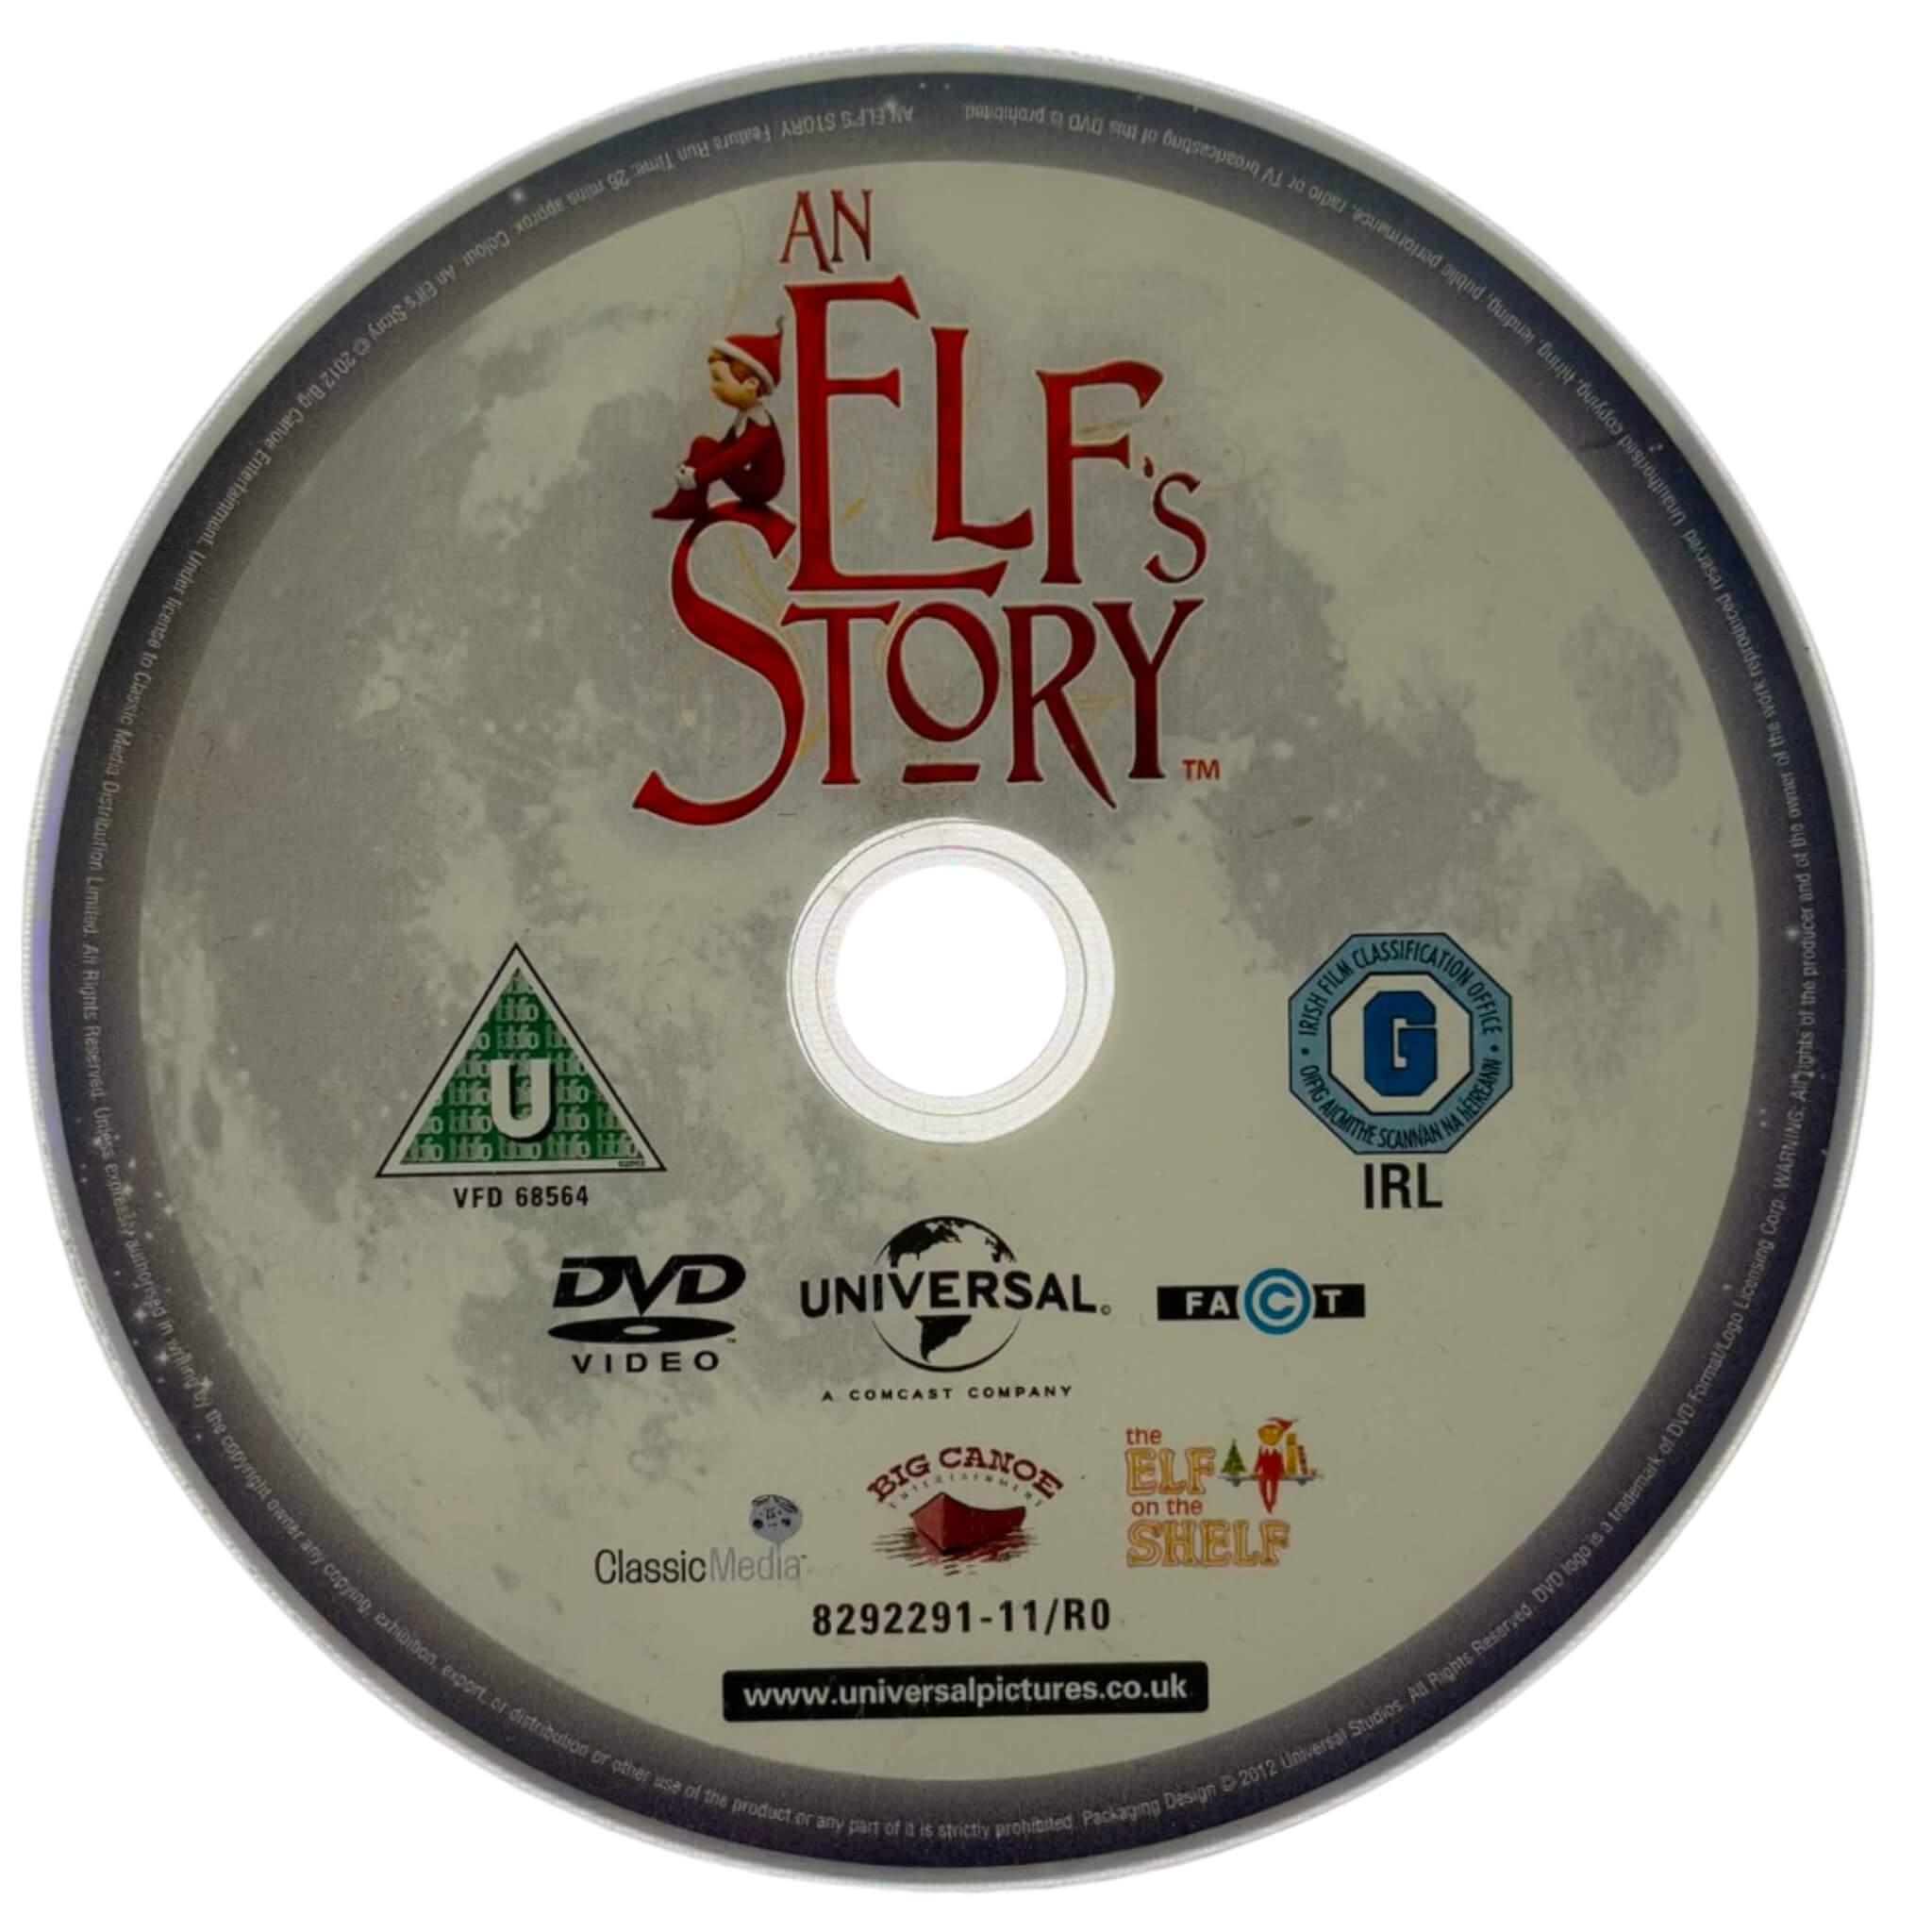 AN ELF'S STORY™ DVD (Disc only) - The Elf on The Shelf